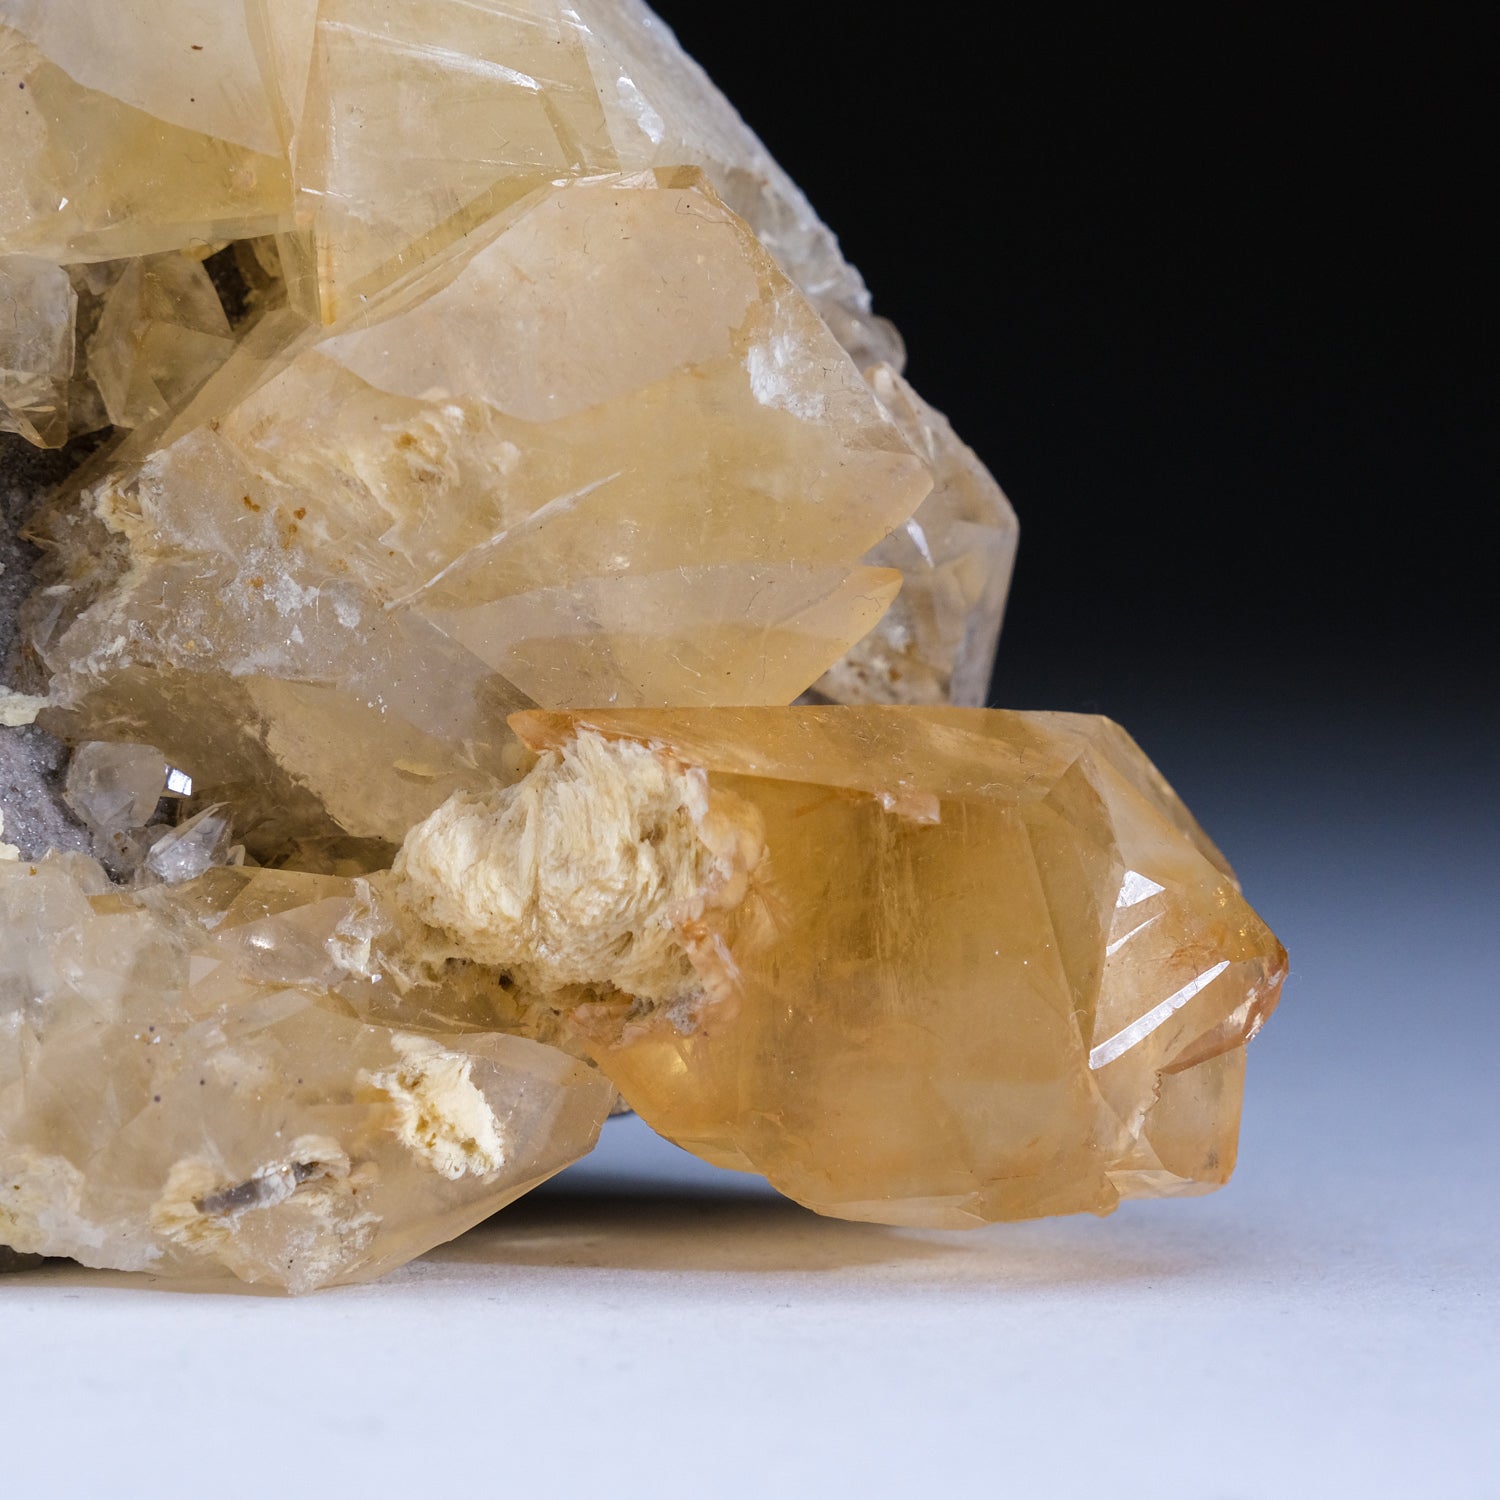 Golden Calcite Crystal from Elmwood Mine, Tennessee (1 lb)